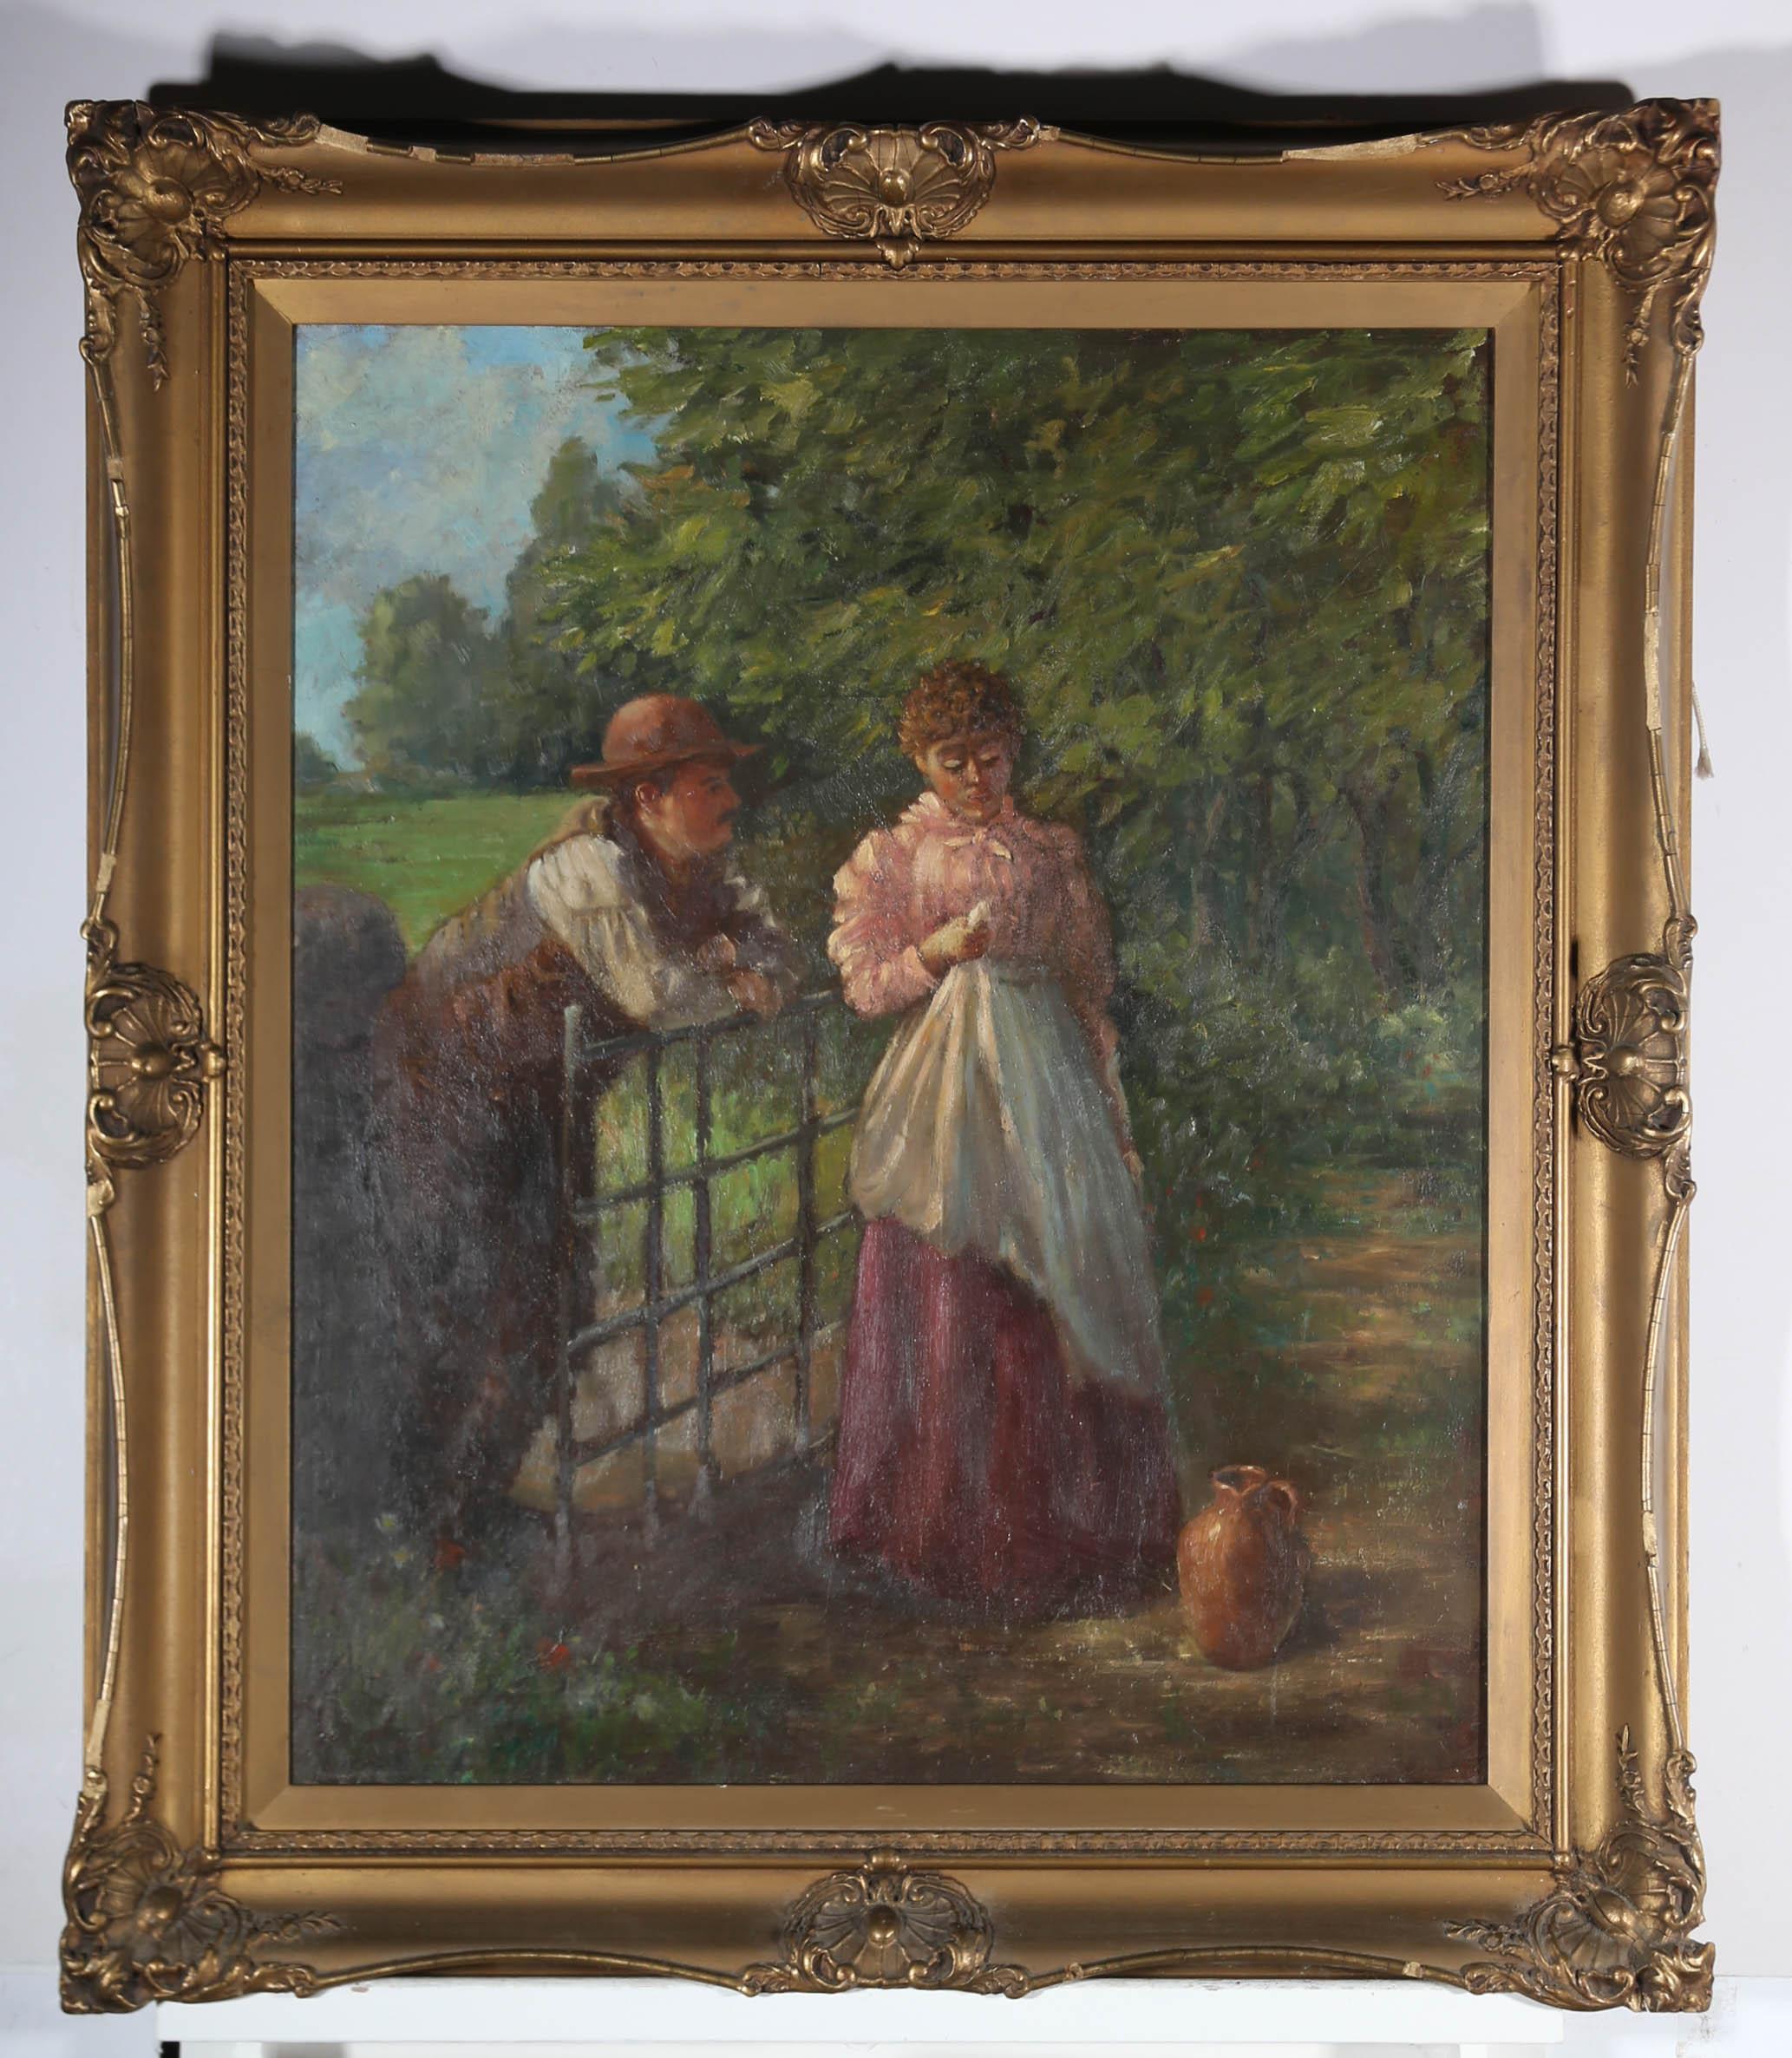 A charming countryside scene depicting a courting couple conversing at a gate. They stand beneath trees before a large park landscape. Unsigned. Presented in a gilt frame with shell and acanthus leaf details. On canvas.
